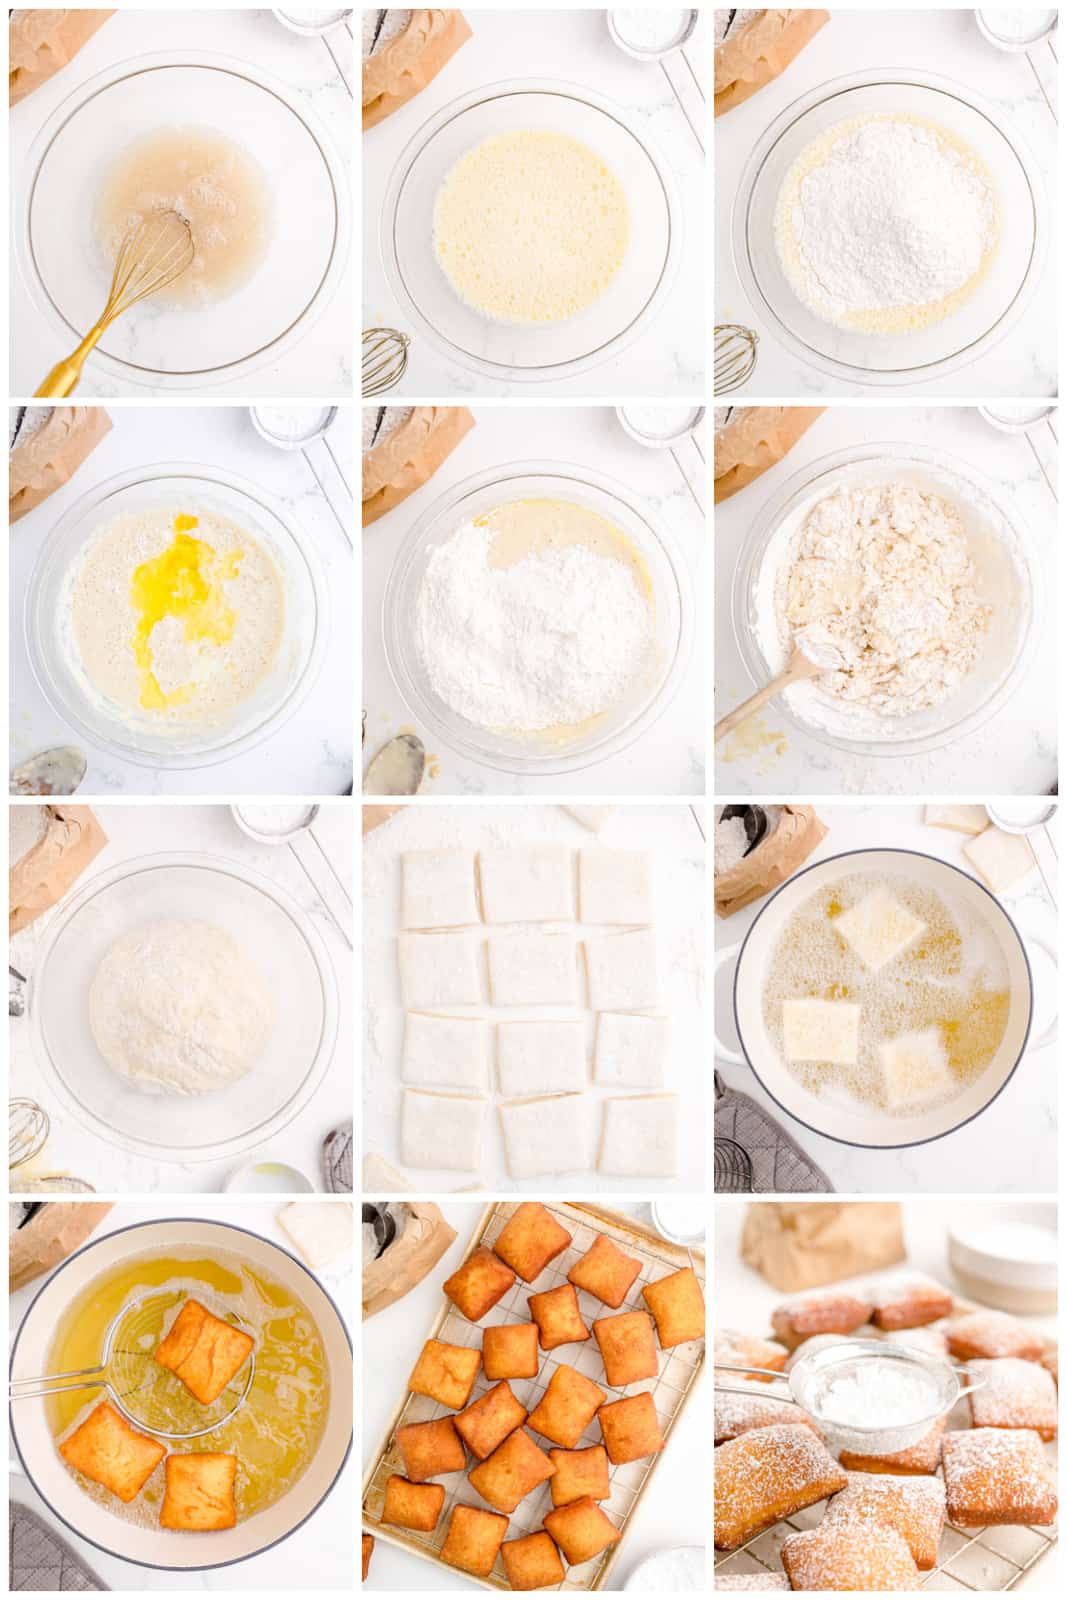 Step by step photos on how to make a Beignet Recipe.